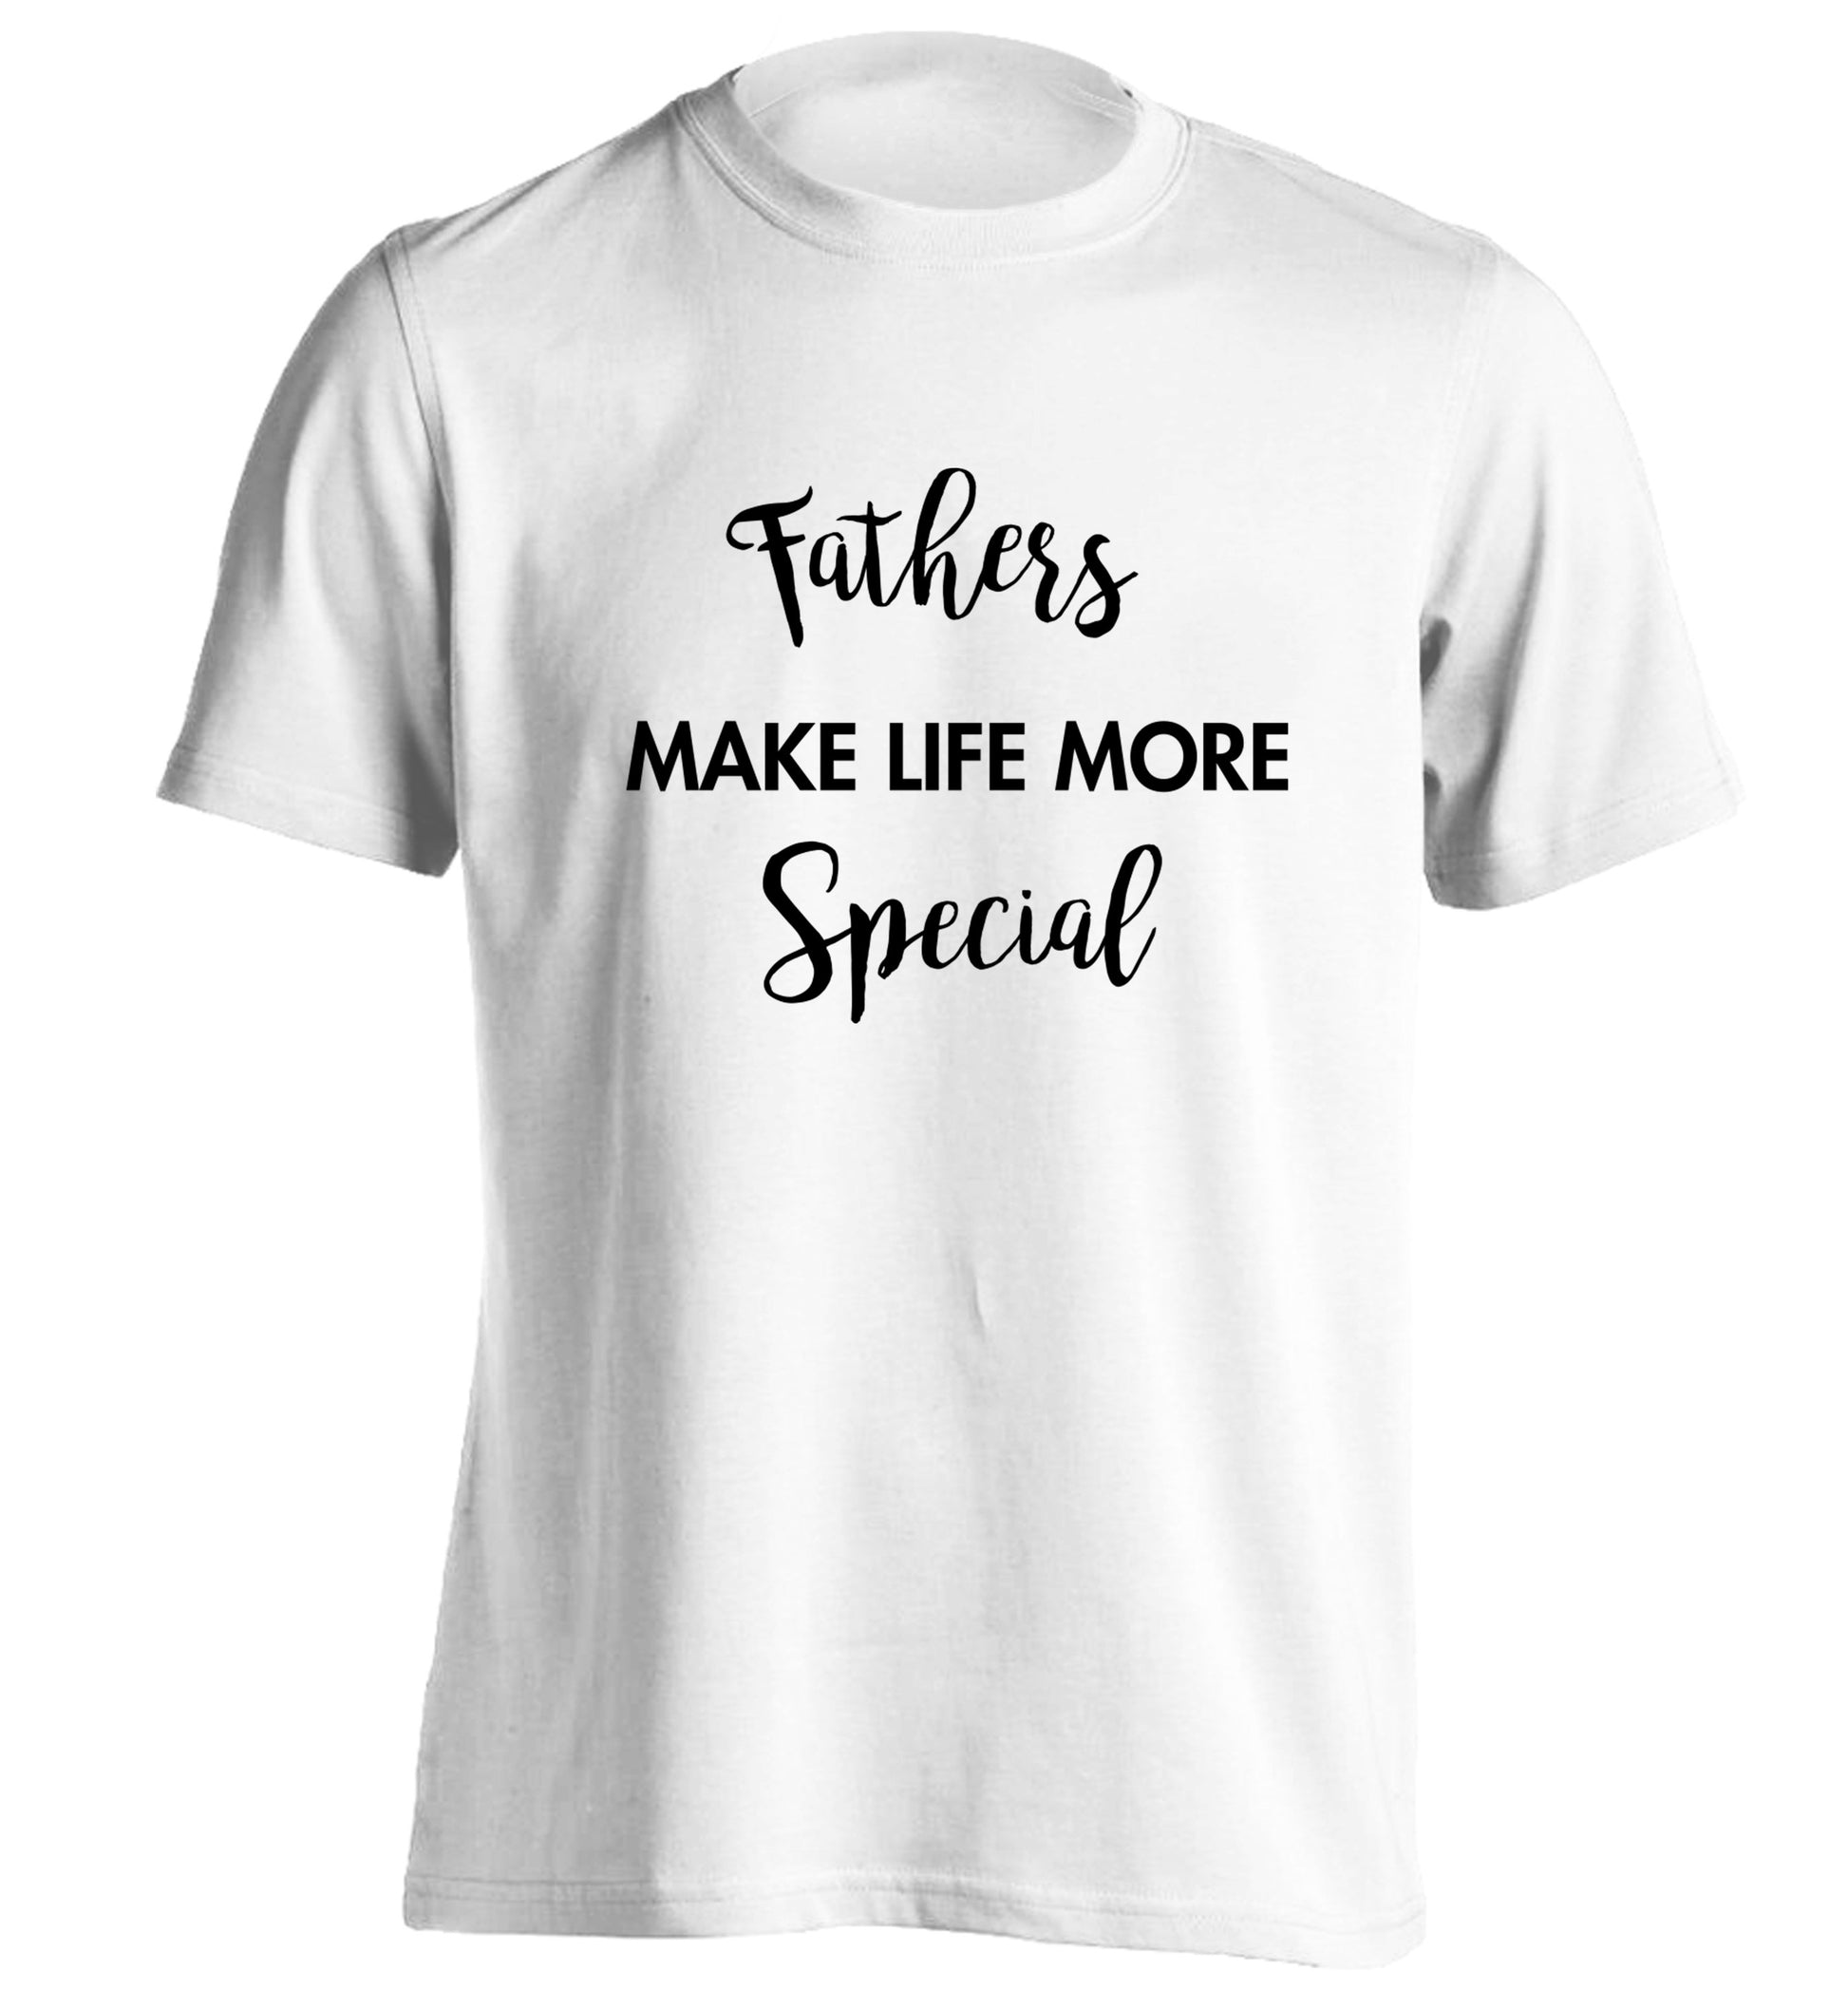 Fathers make life more special adults unisex white Tshirt 2XL